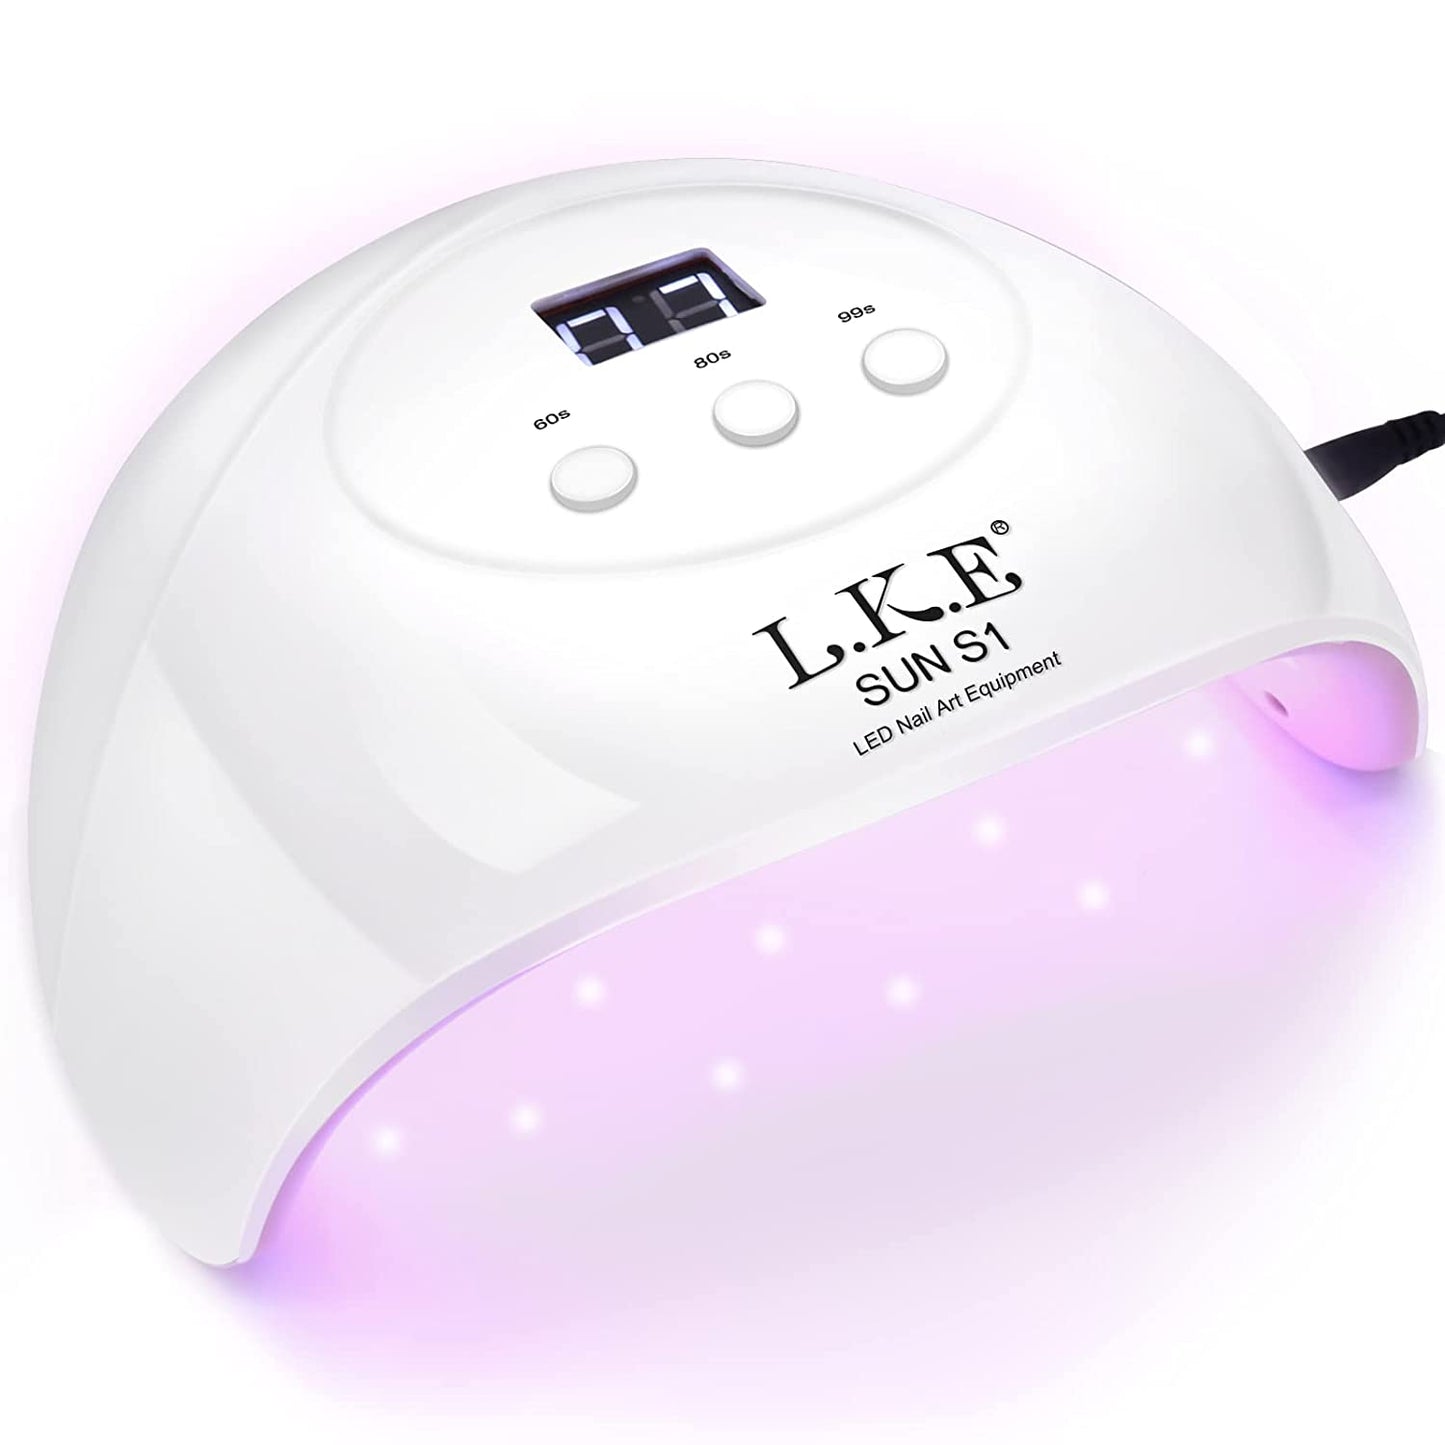 UV Light for Nails, Nail Dryer 72 W Professional Nail UV Light for Gel Polish with 3 Timers